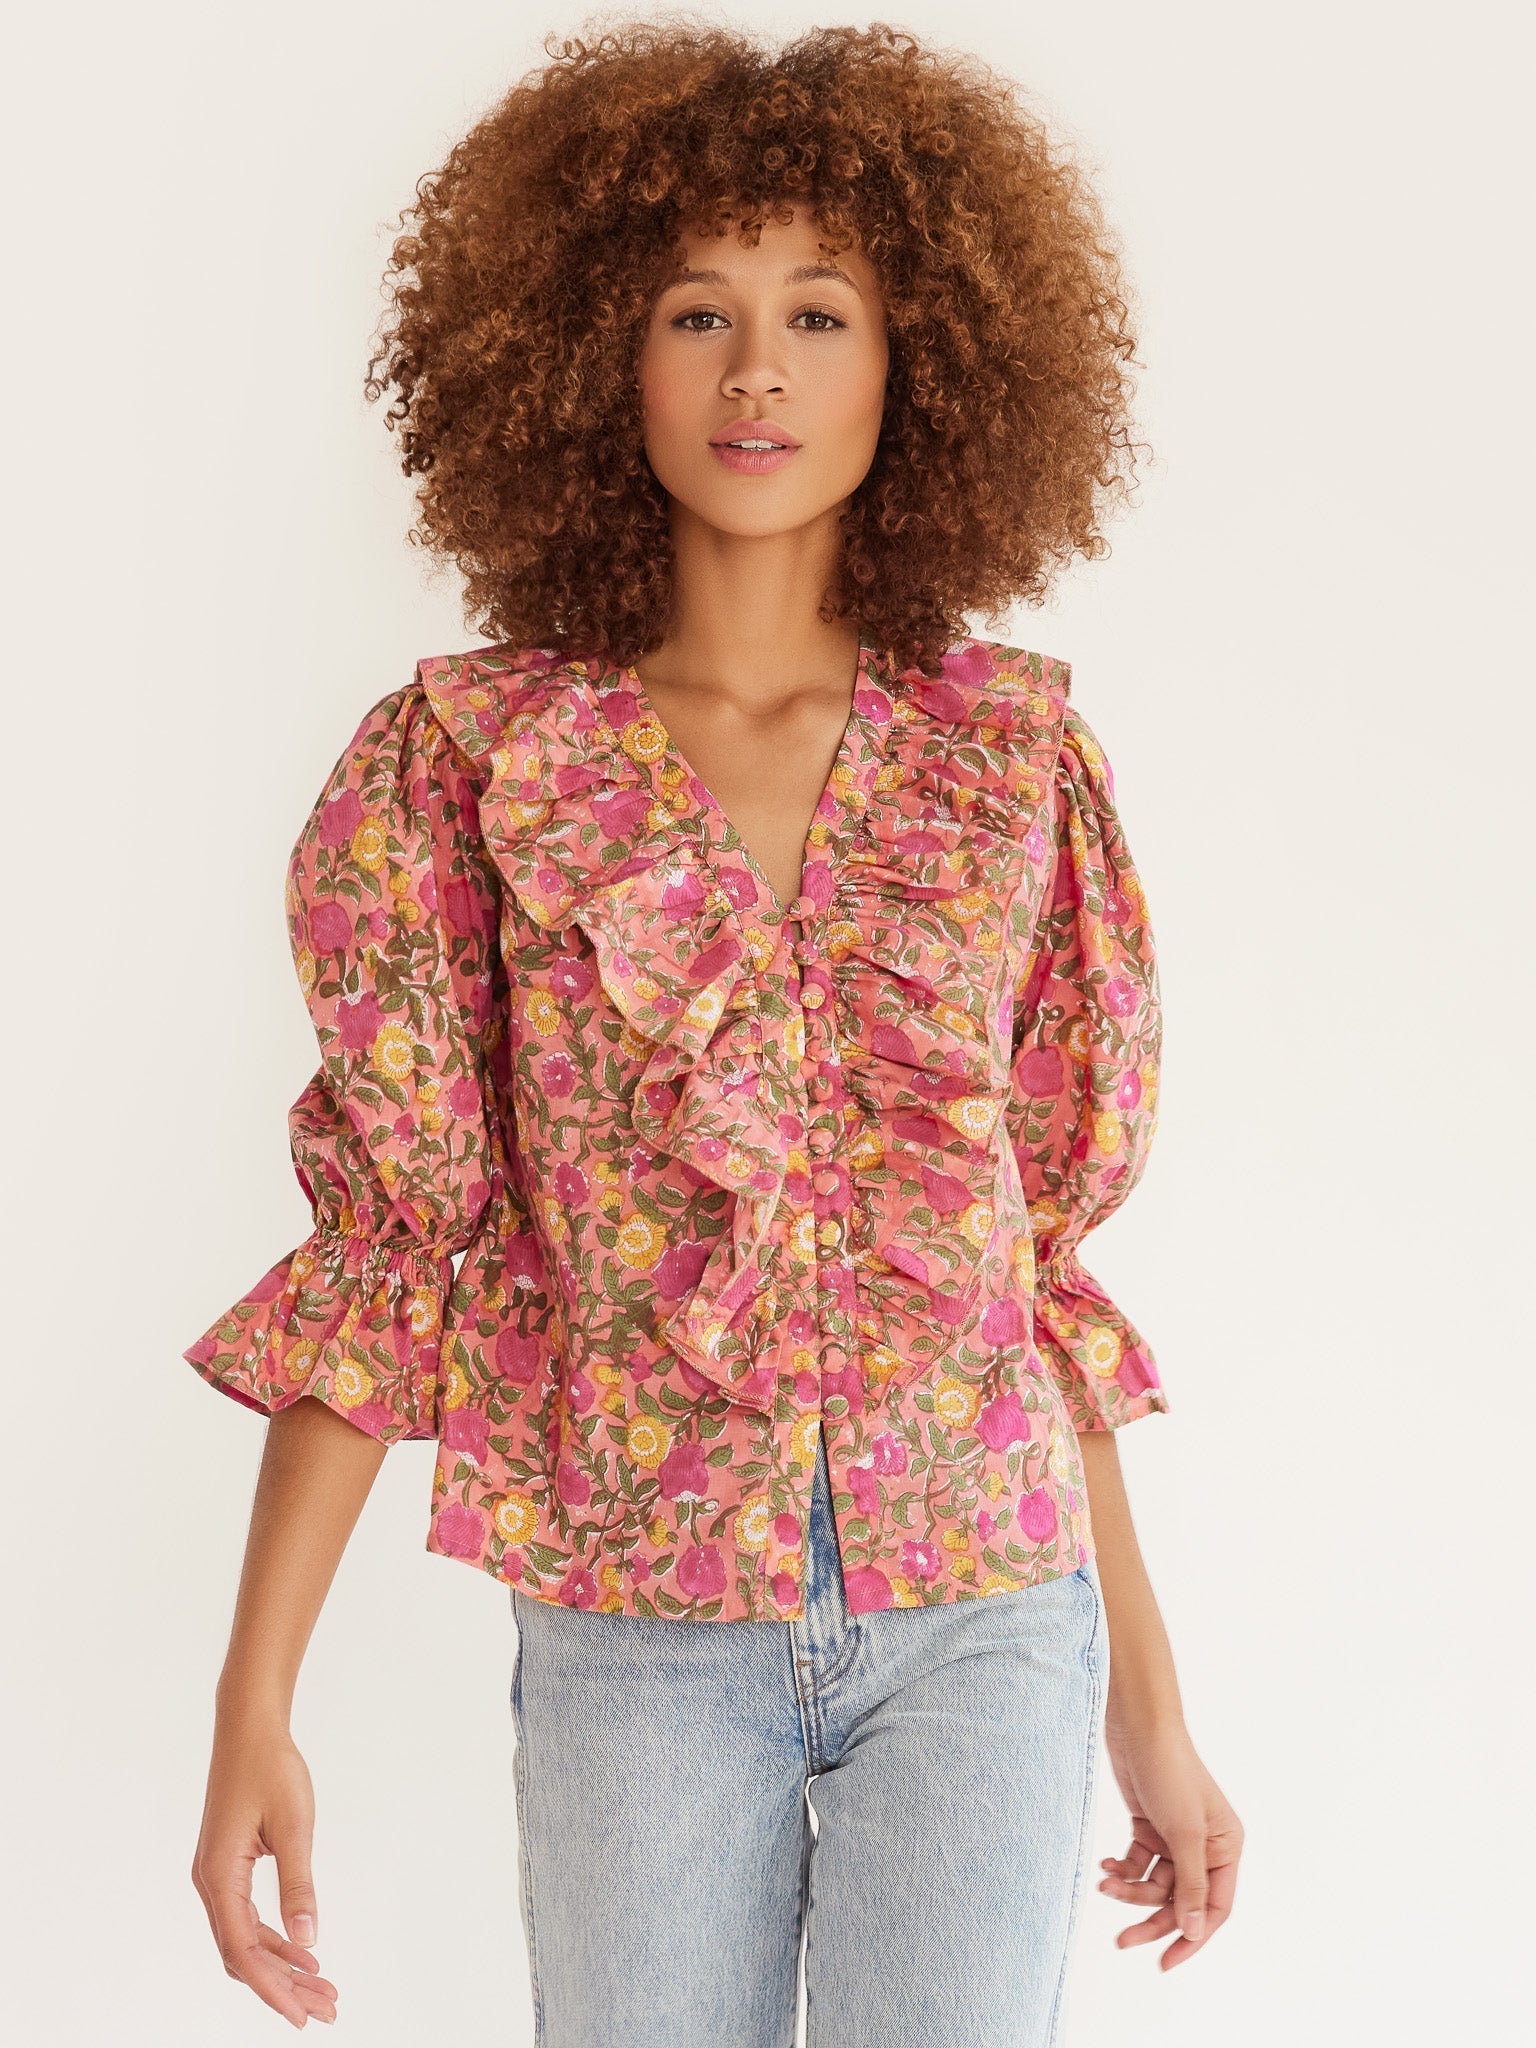 MILLE Clothing Hanna Top in Passionfruit